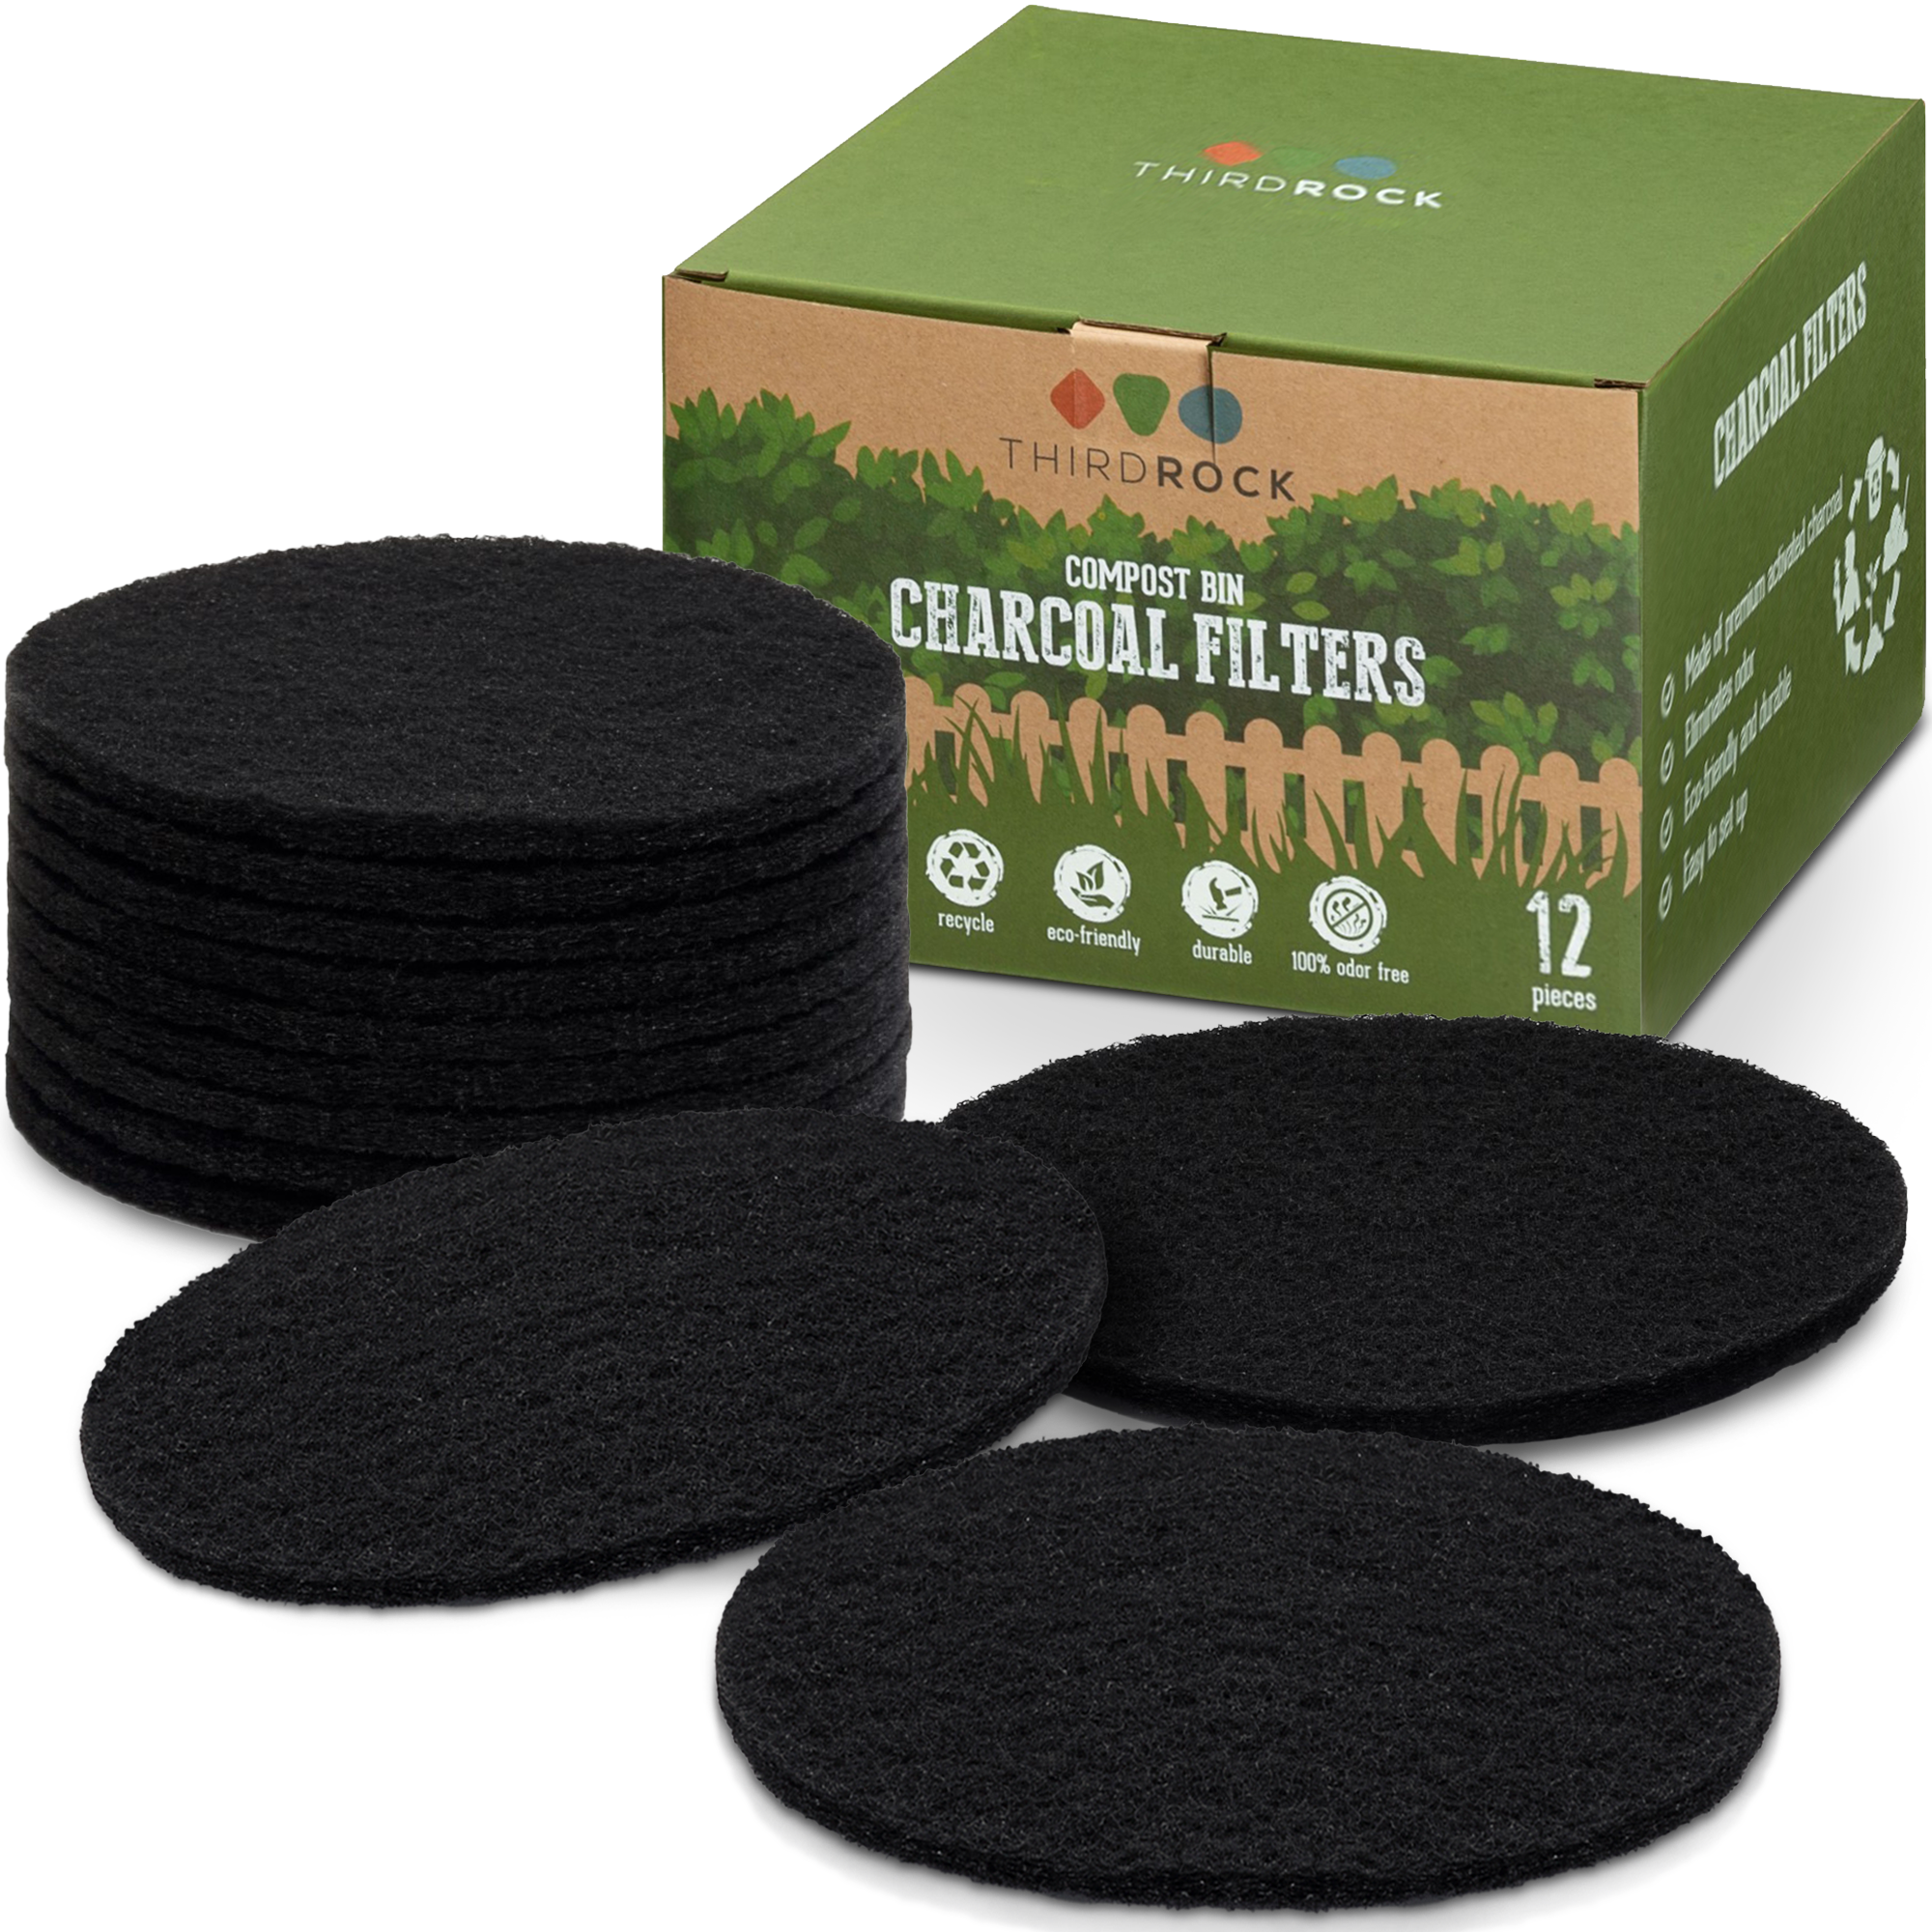 Compost Rite 6 Pack Charcoal Filters for Compost Bucket - Round 7.25 inch Compost Pail Filters, 0.4 inch Ultra Thick Compost Bin Charcoal Filter